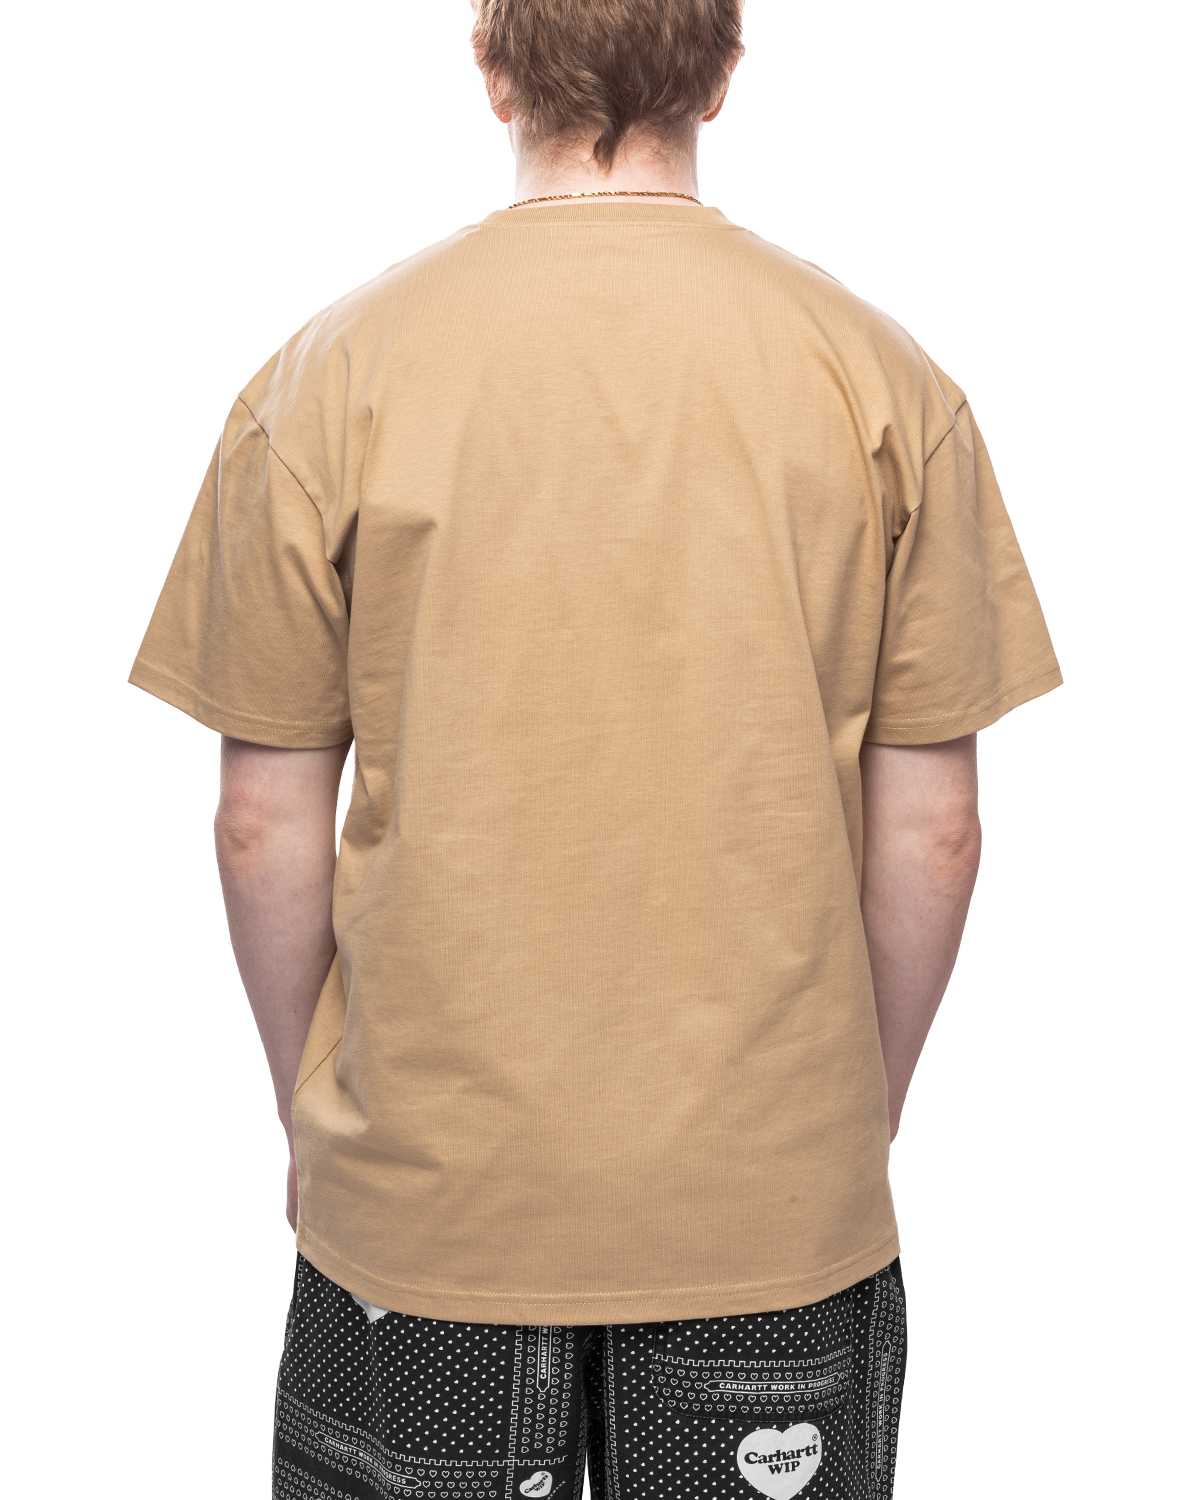 S/S Chase T-Shirt Sable/Gold